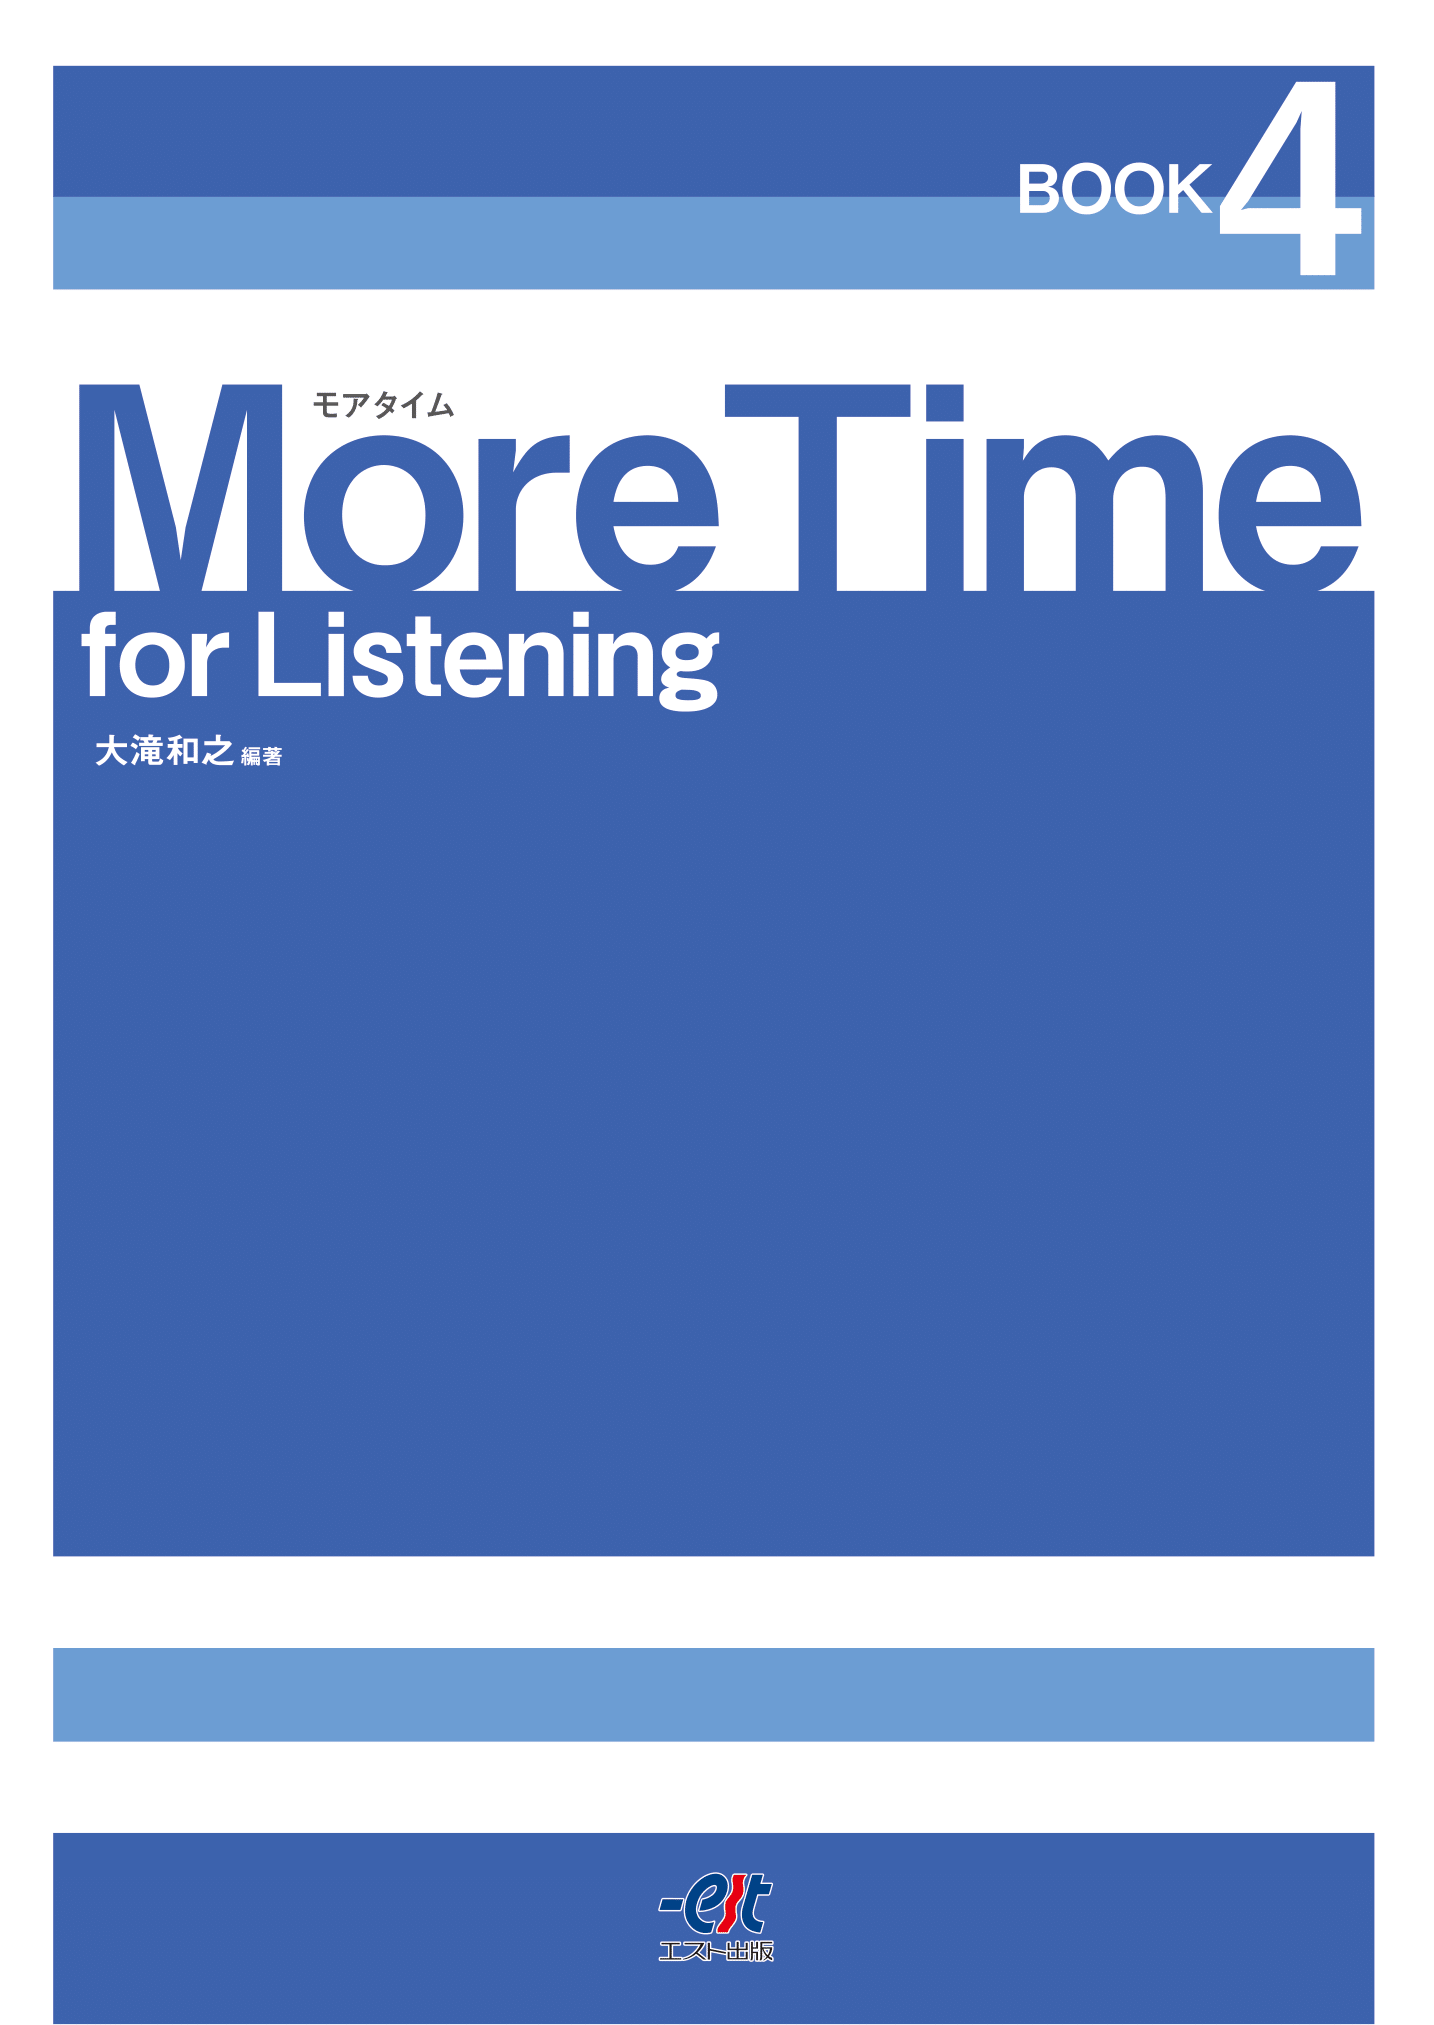 More Time for Listening BOOK 4 - 株式会社エスト出版